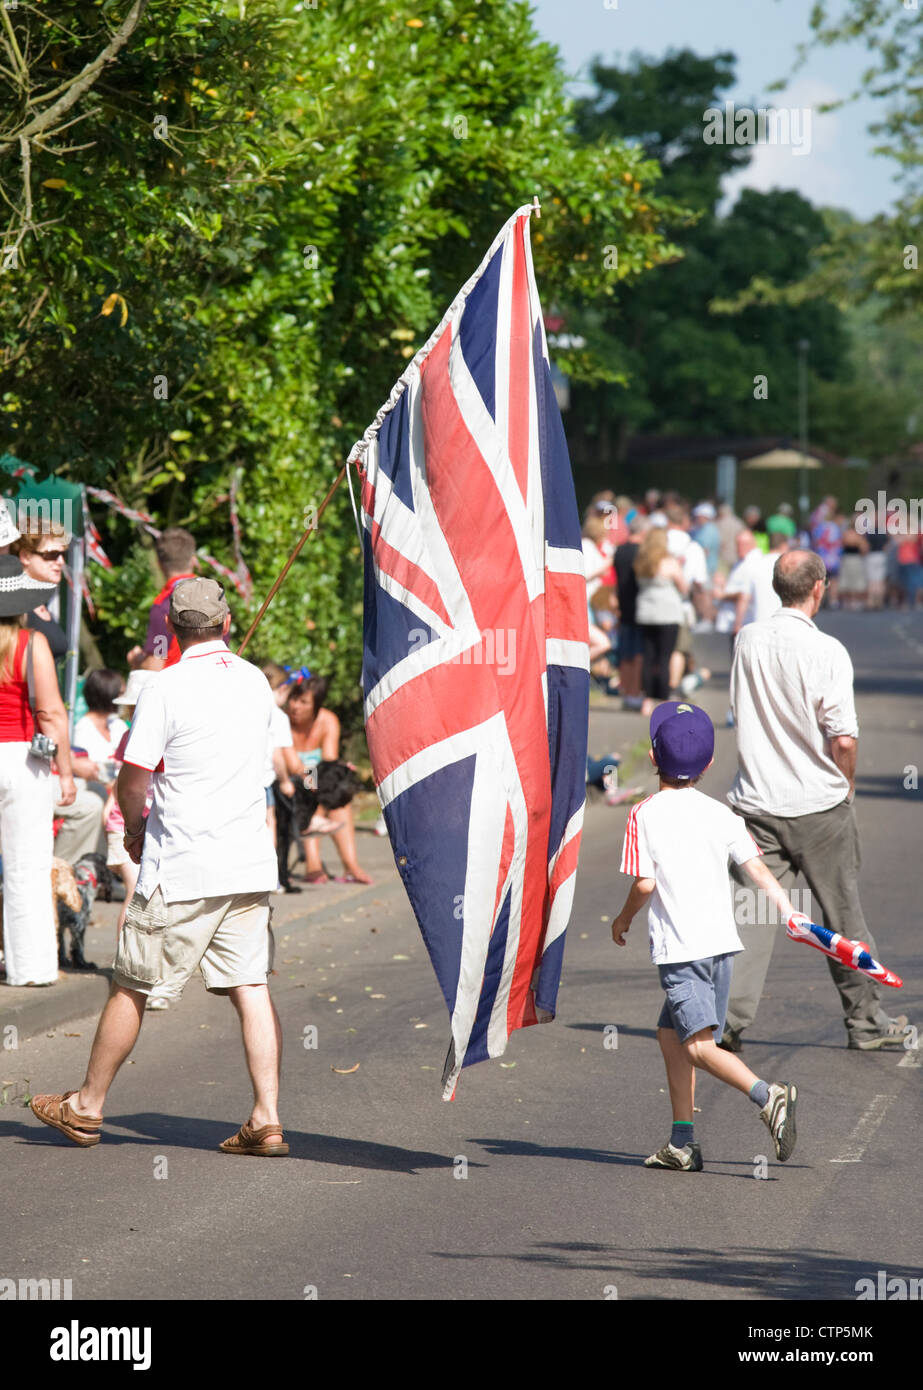 London 2012 Olympic Games. Gathering for men's cycle road race at Ripley, Surrey. Stock Photo